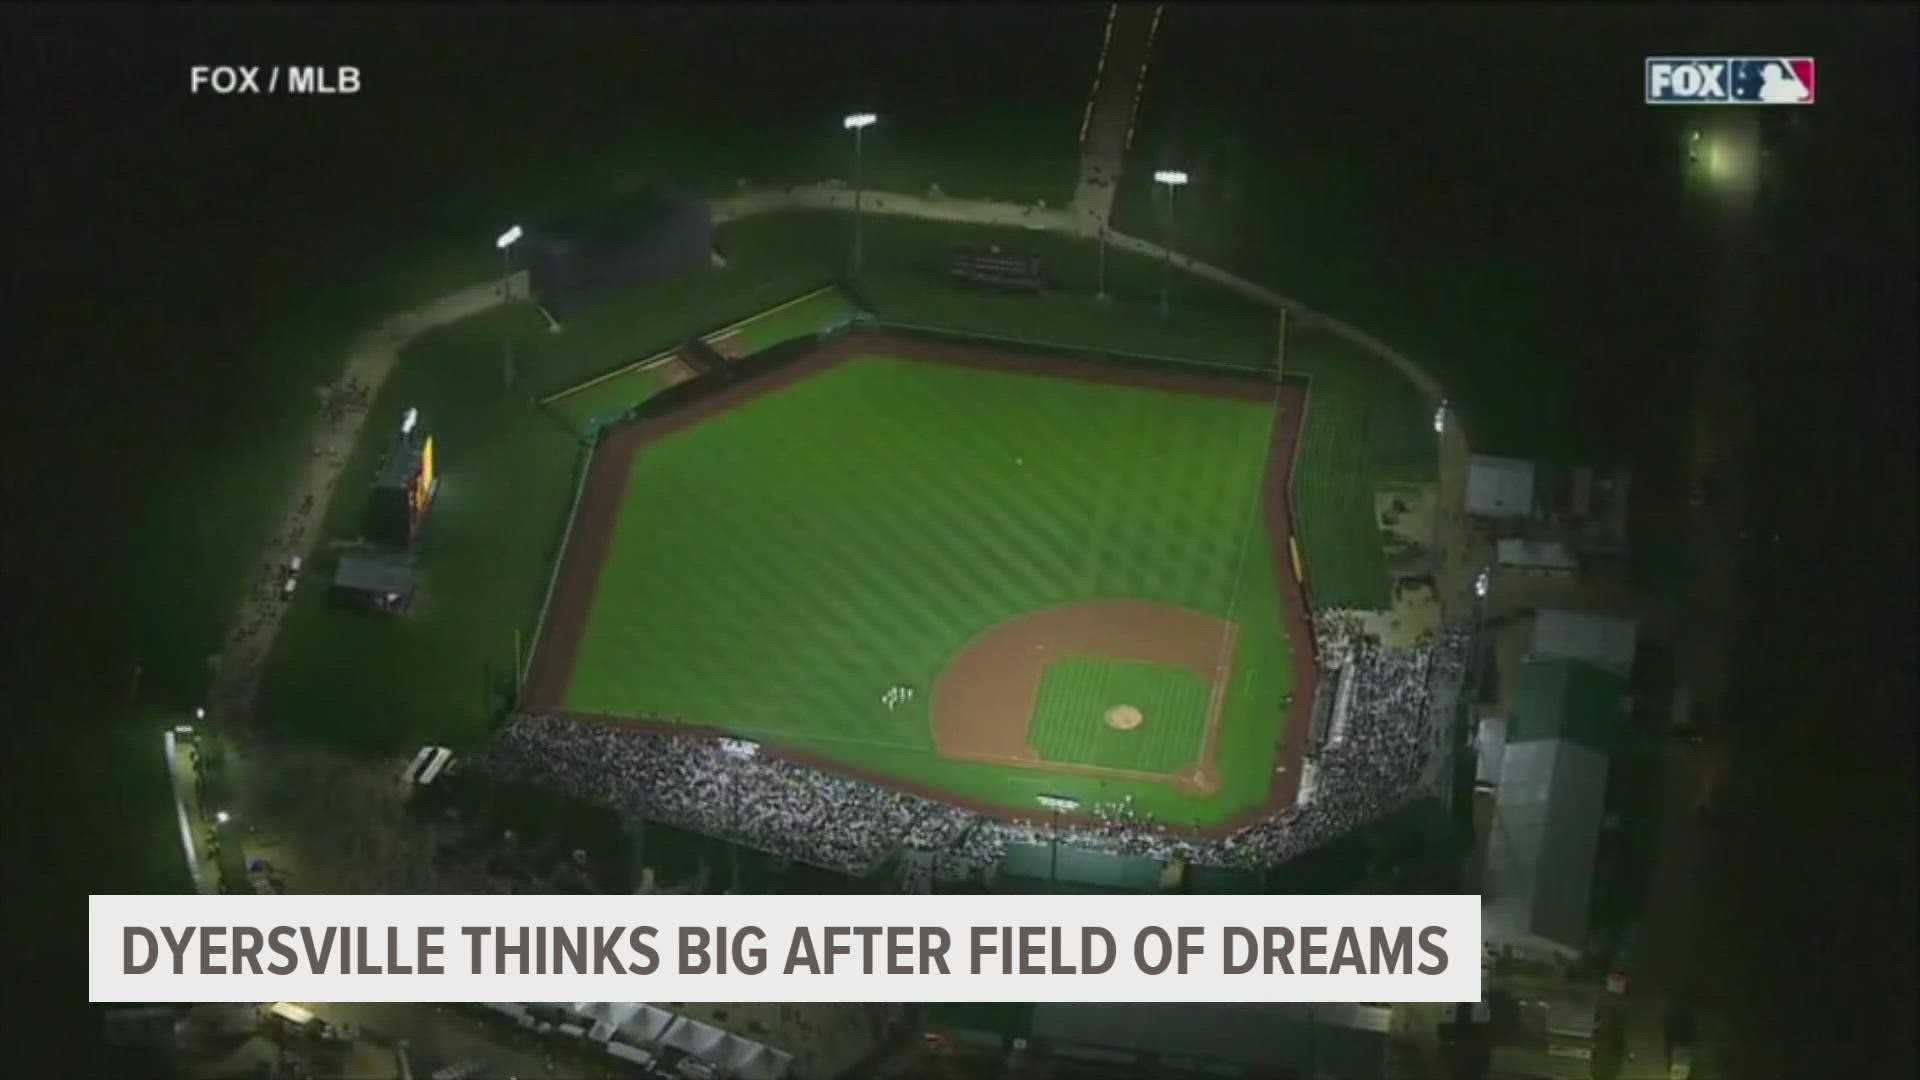 Baseball fans take over Dyersville for Field of Dreams game